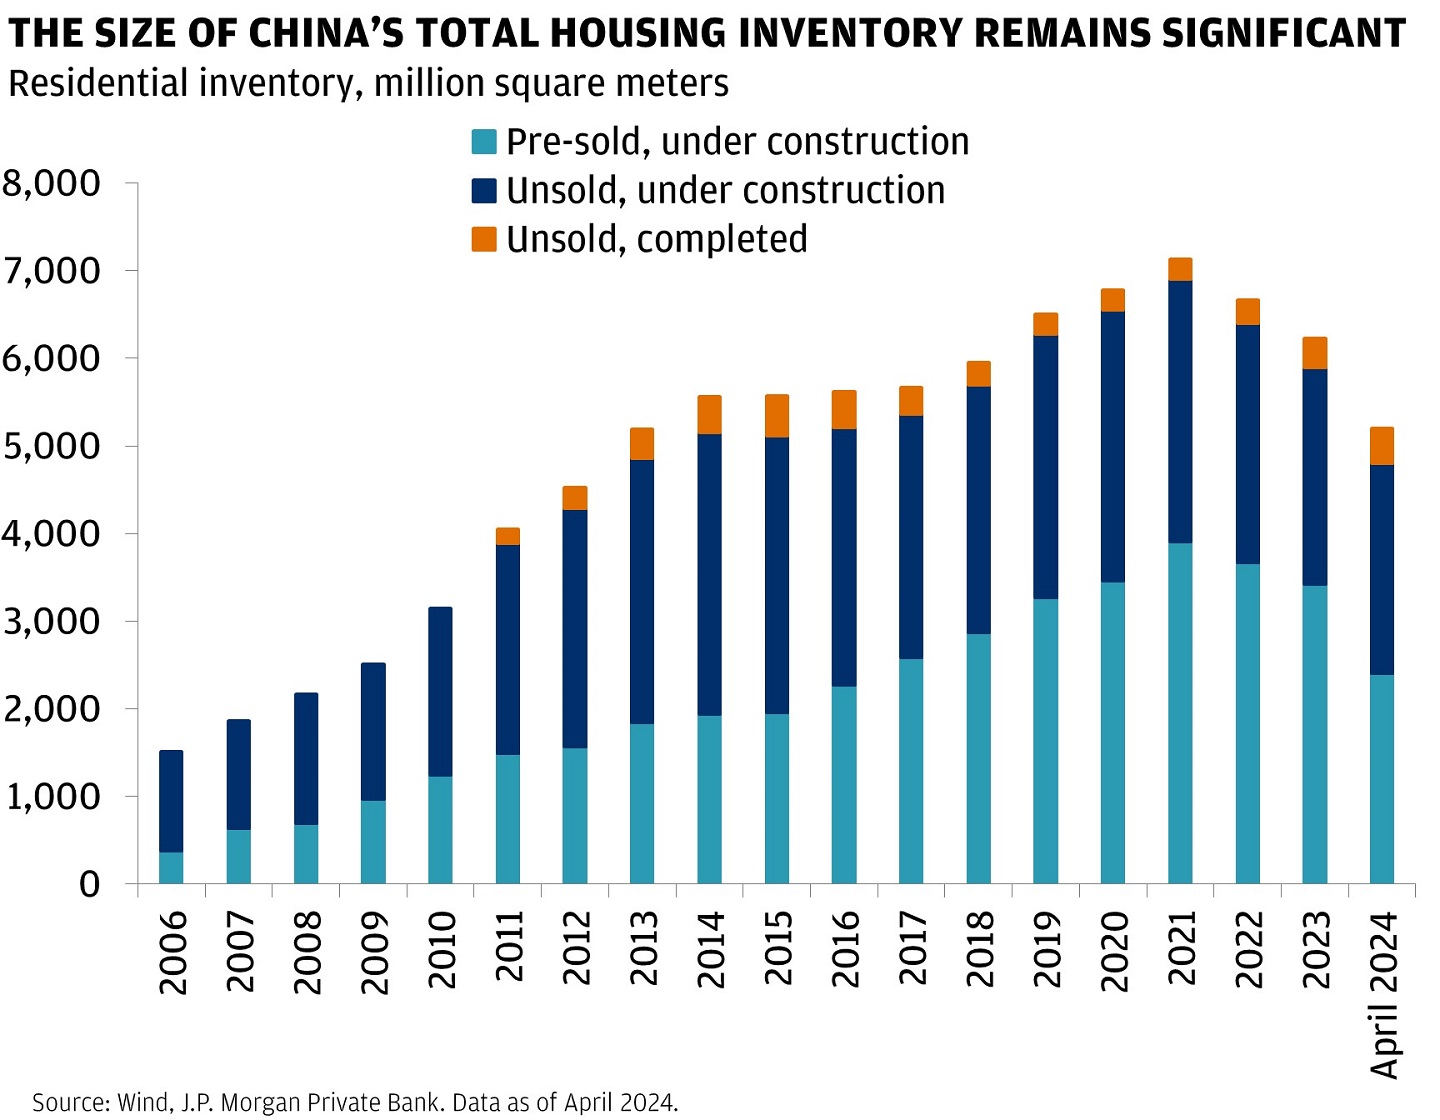 This bar graph shows China’s residential inventory in million square meters from 2006 to April 2024, comprising 1.